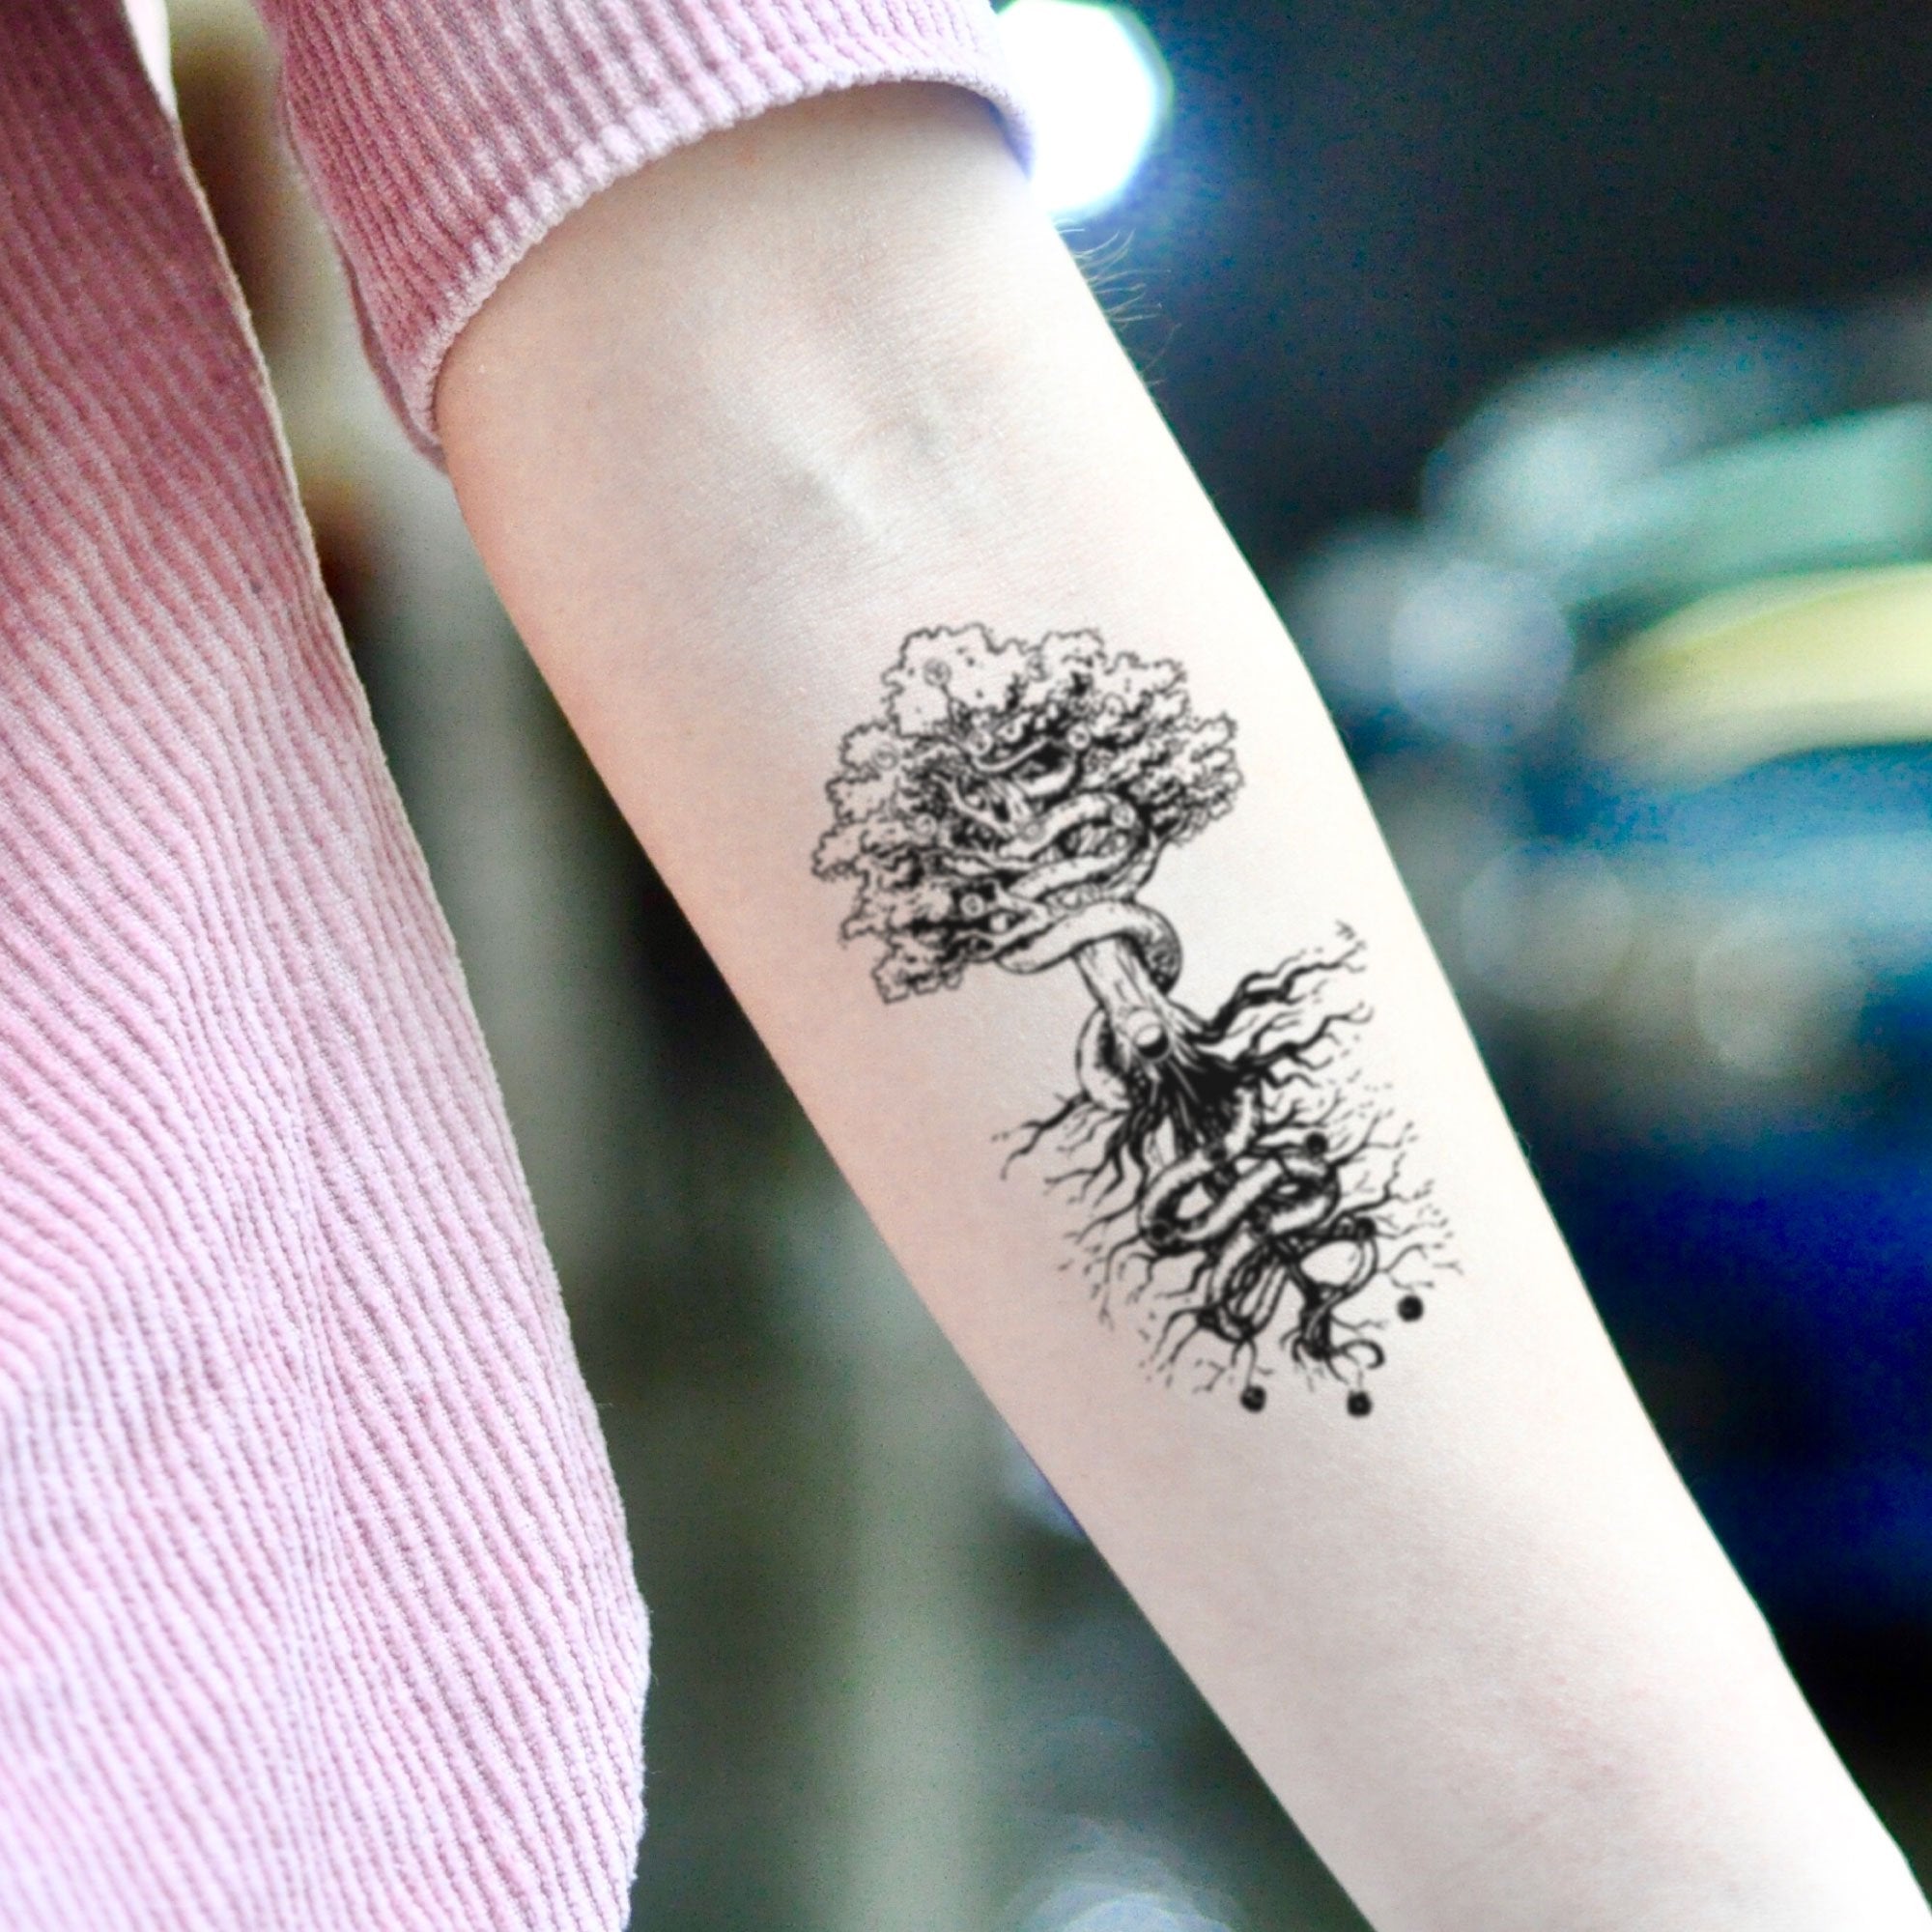 As Above So Below Temporary Tattoo Sticker - OhMyTat